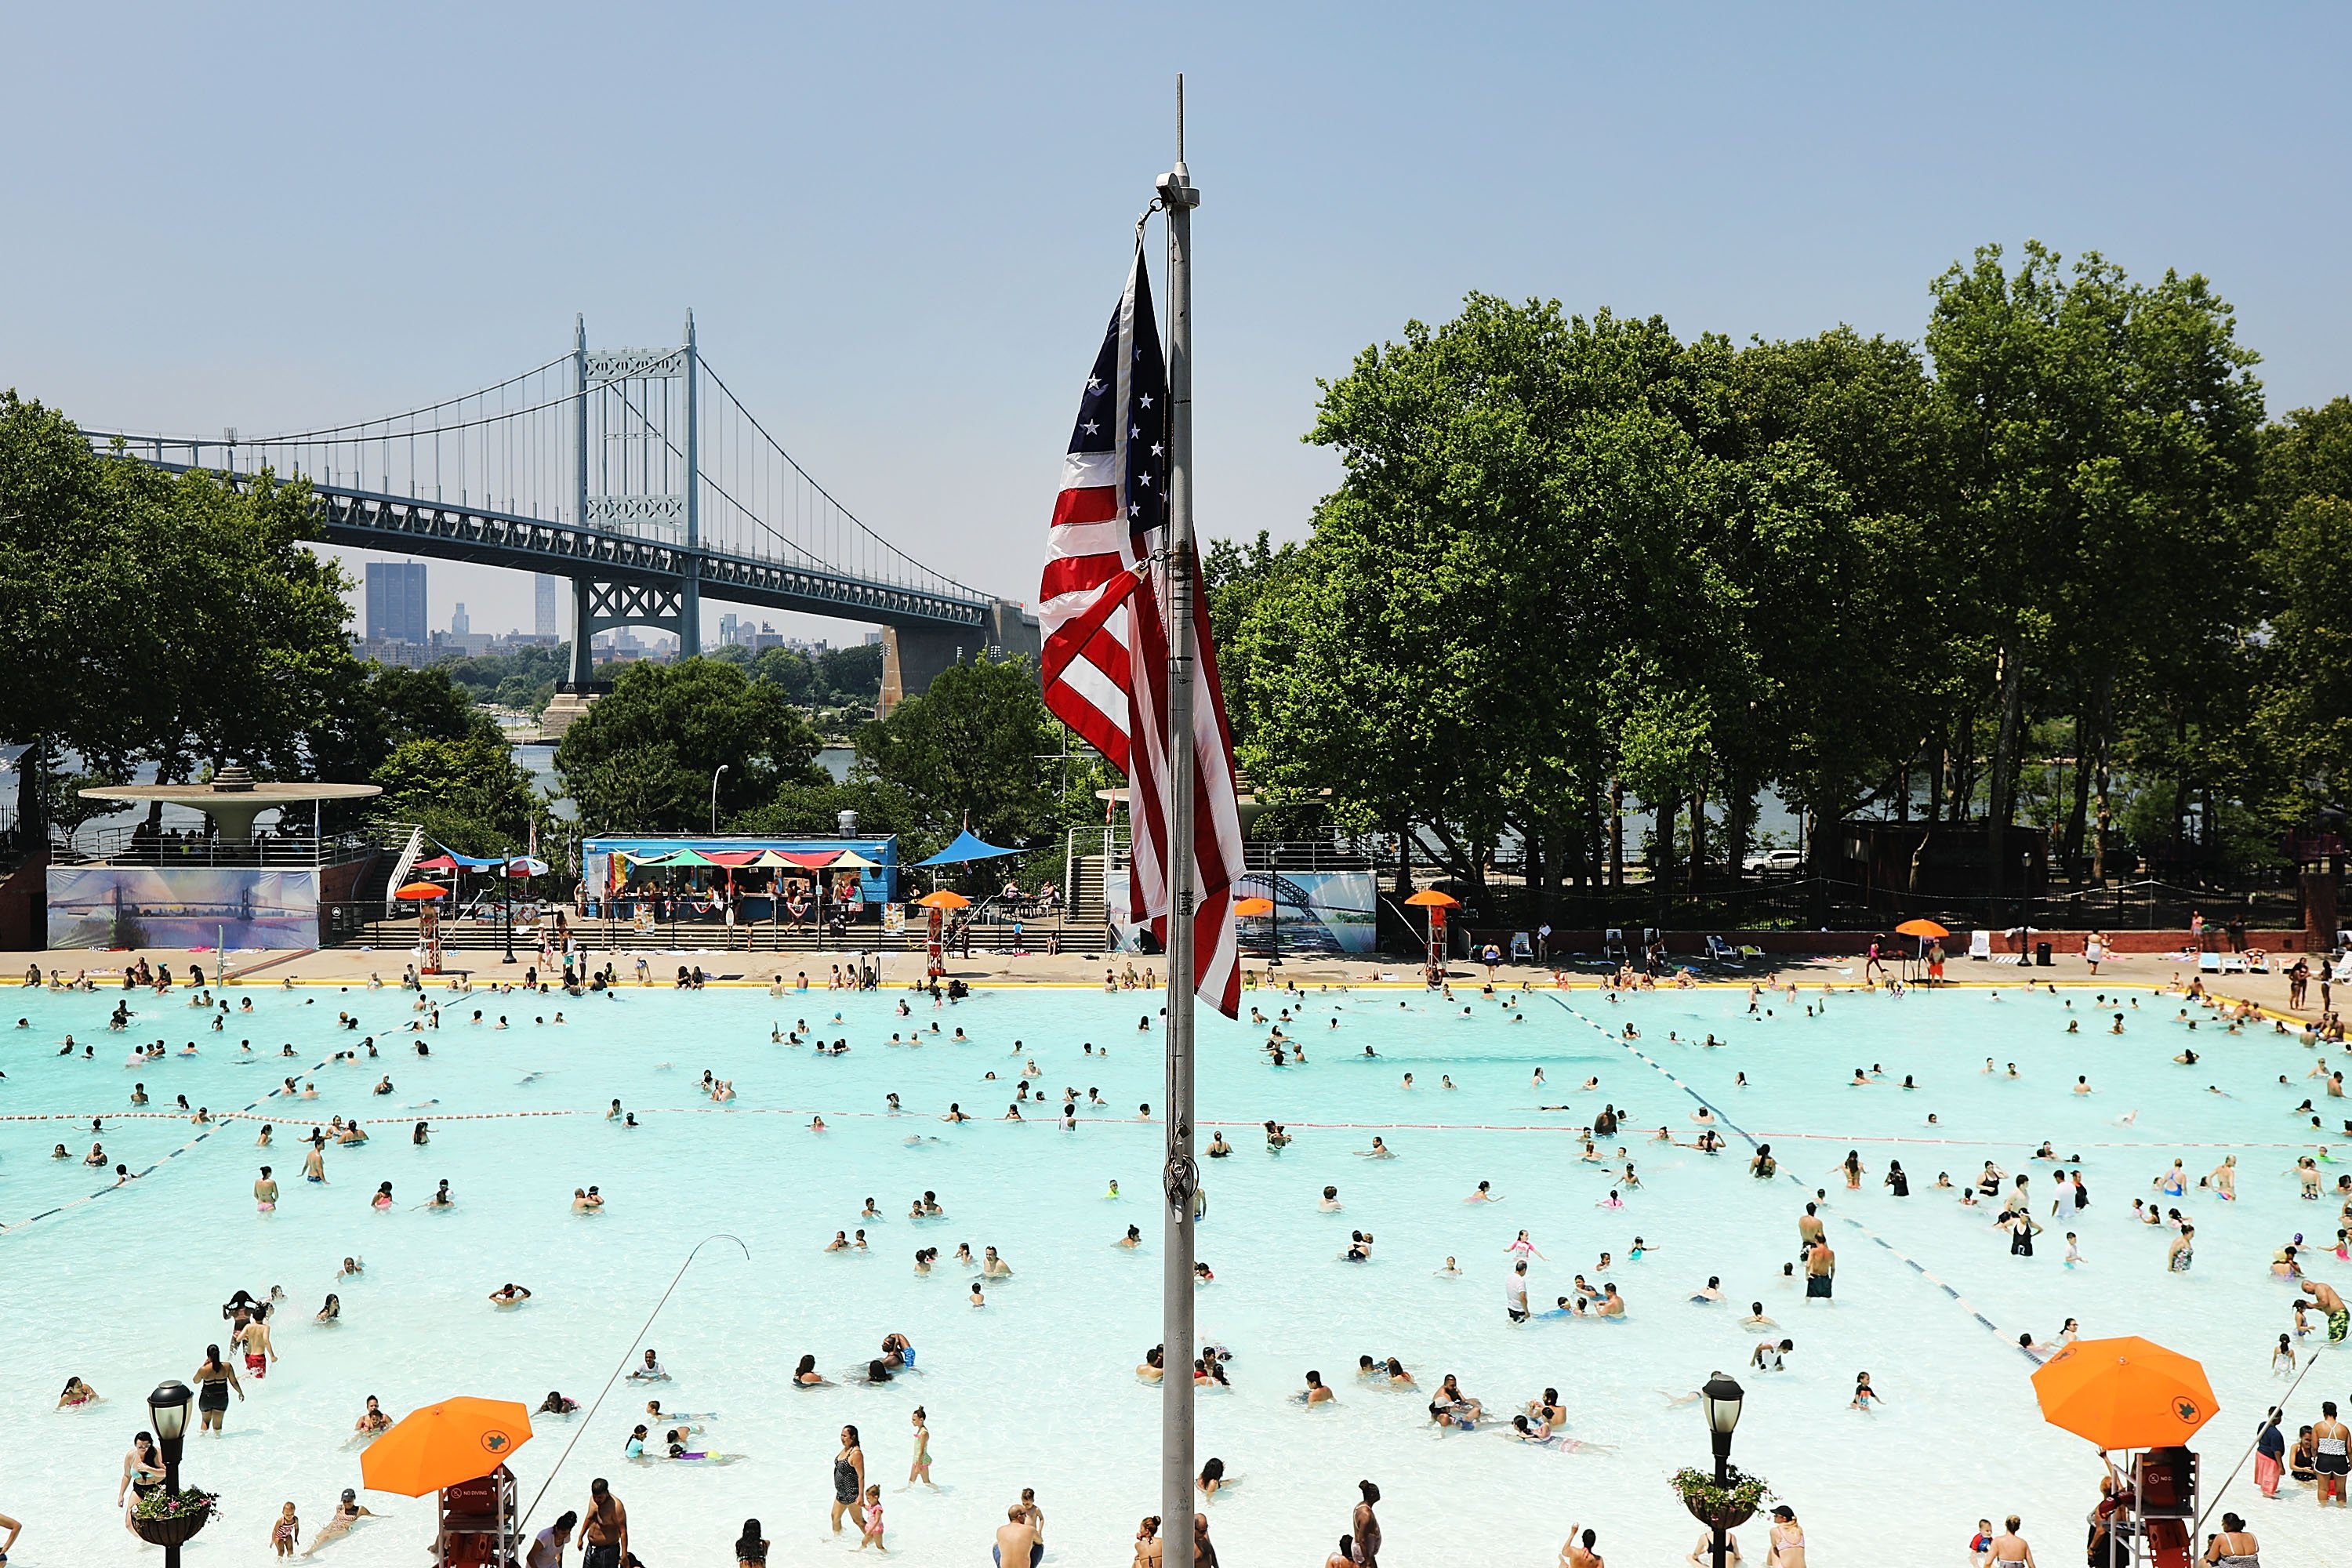 People enjoy a hot afternoon at the Astoria Pool in the borough of Queens on July 2, 2018 in New York City. (Photo by Spencer Platt/Getty Images)